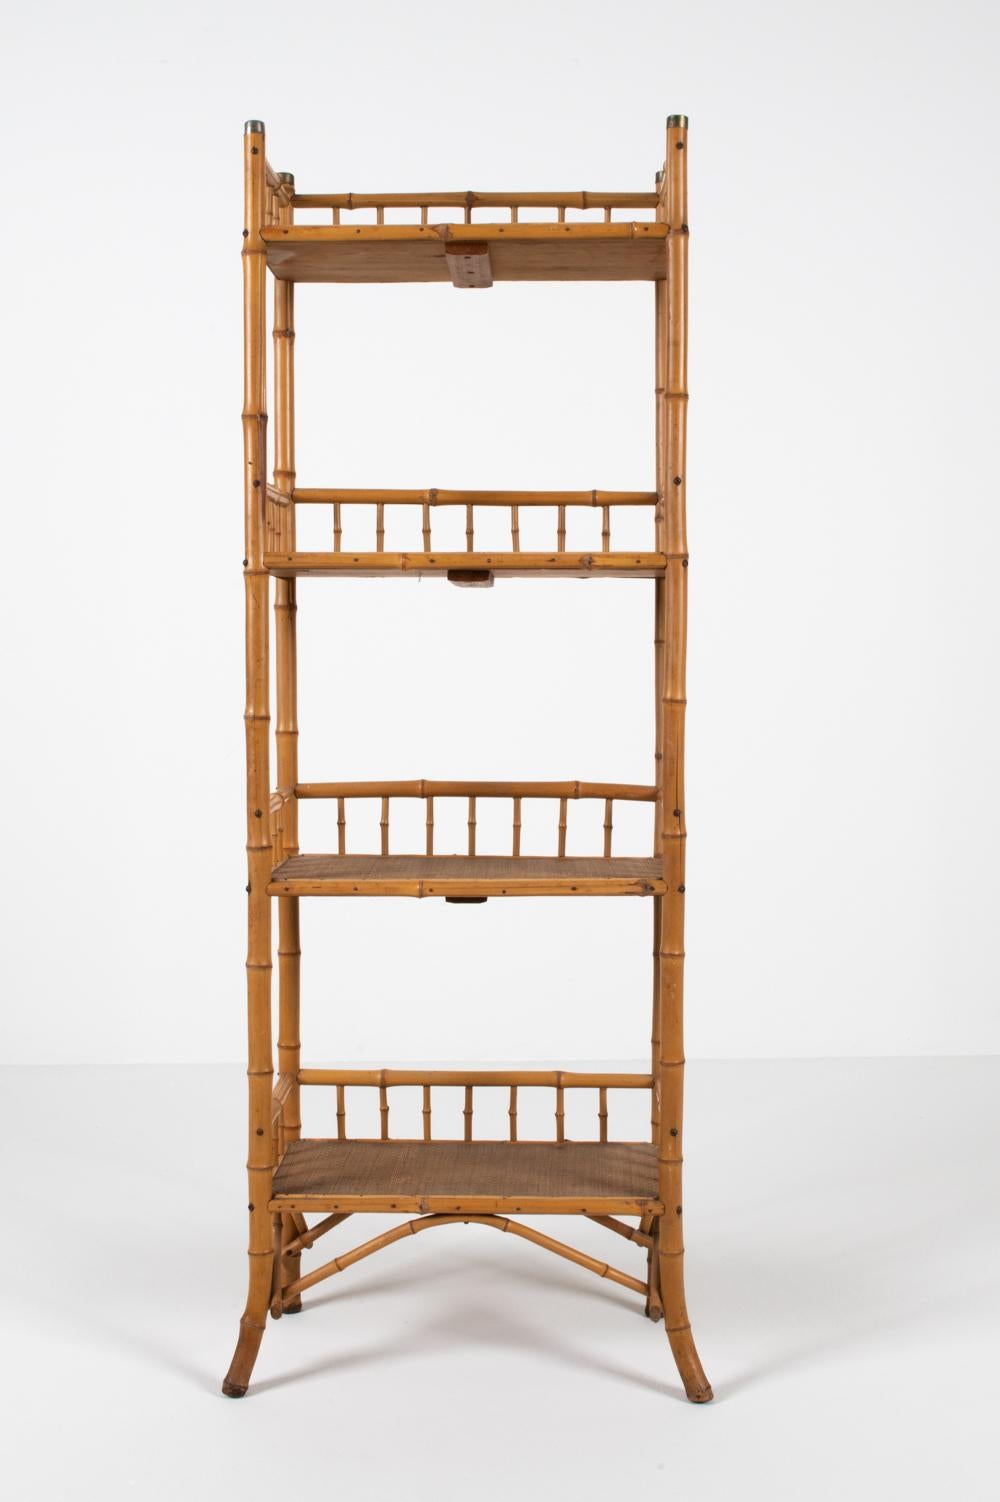 European Mid-Century Bamboo Etagere in the Manner of R. Wengler, c. 1950's